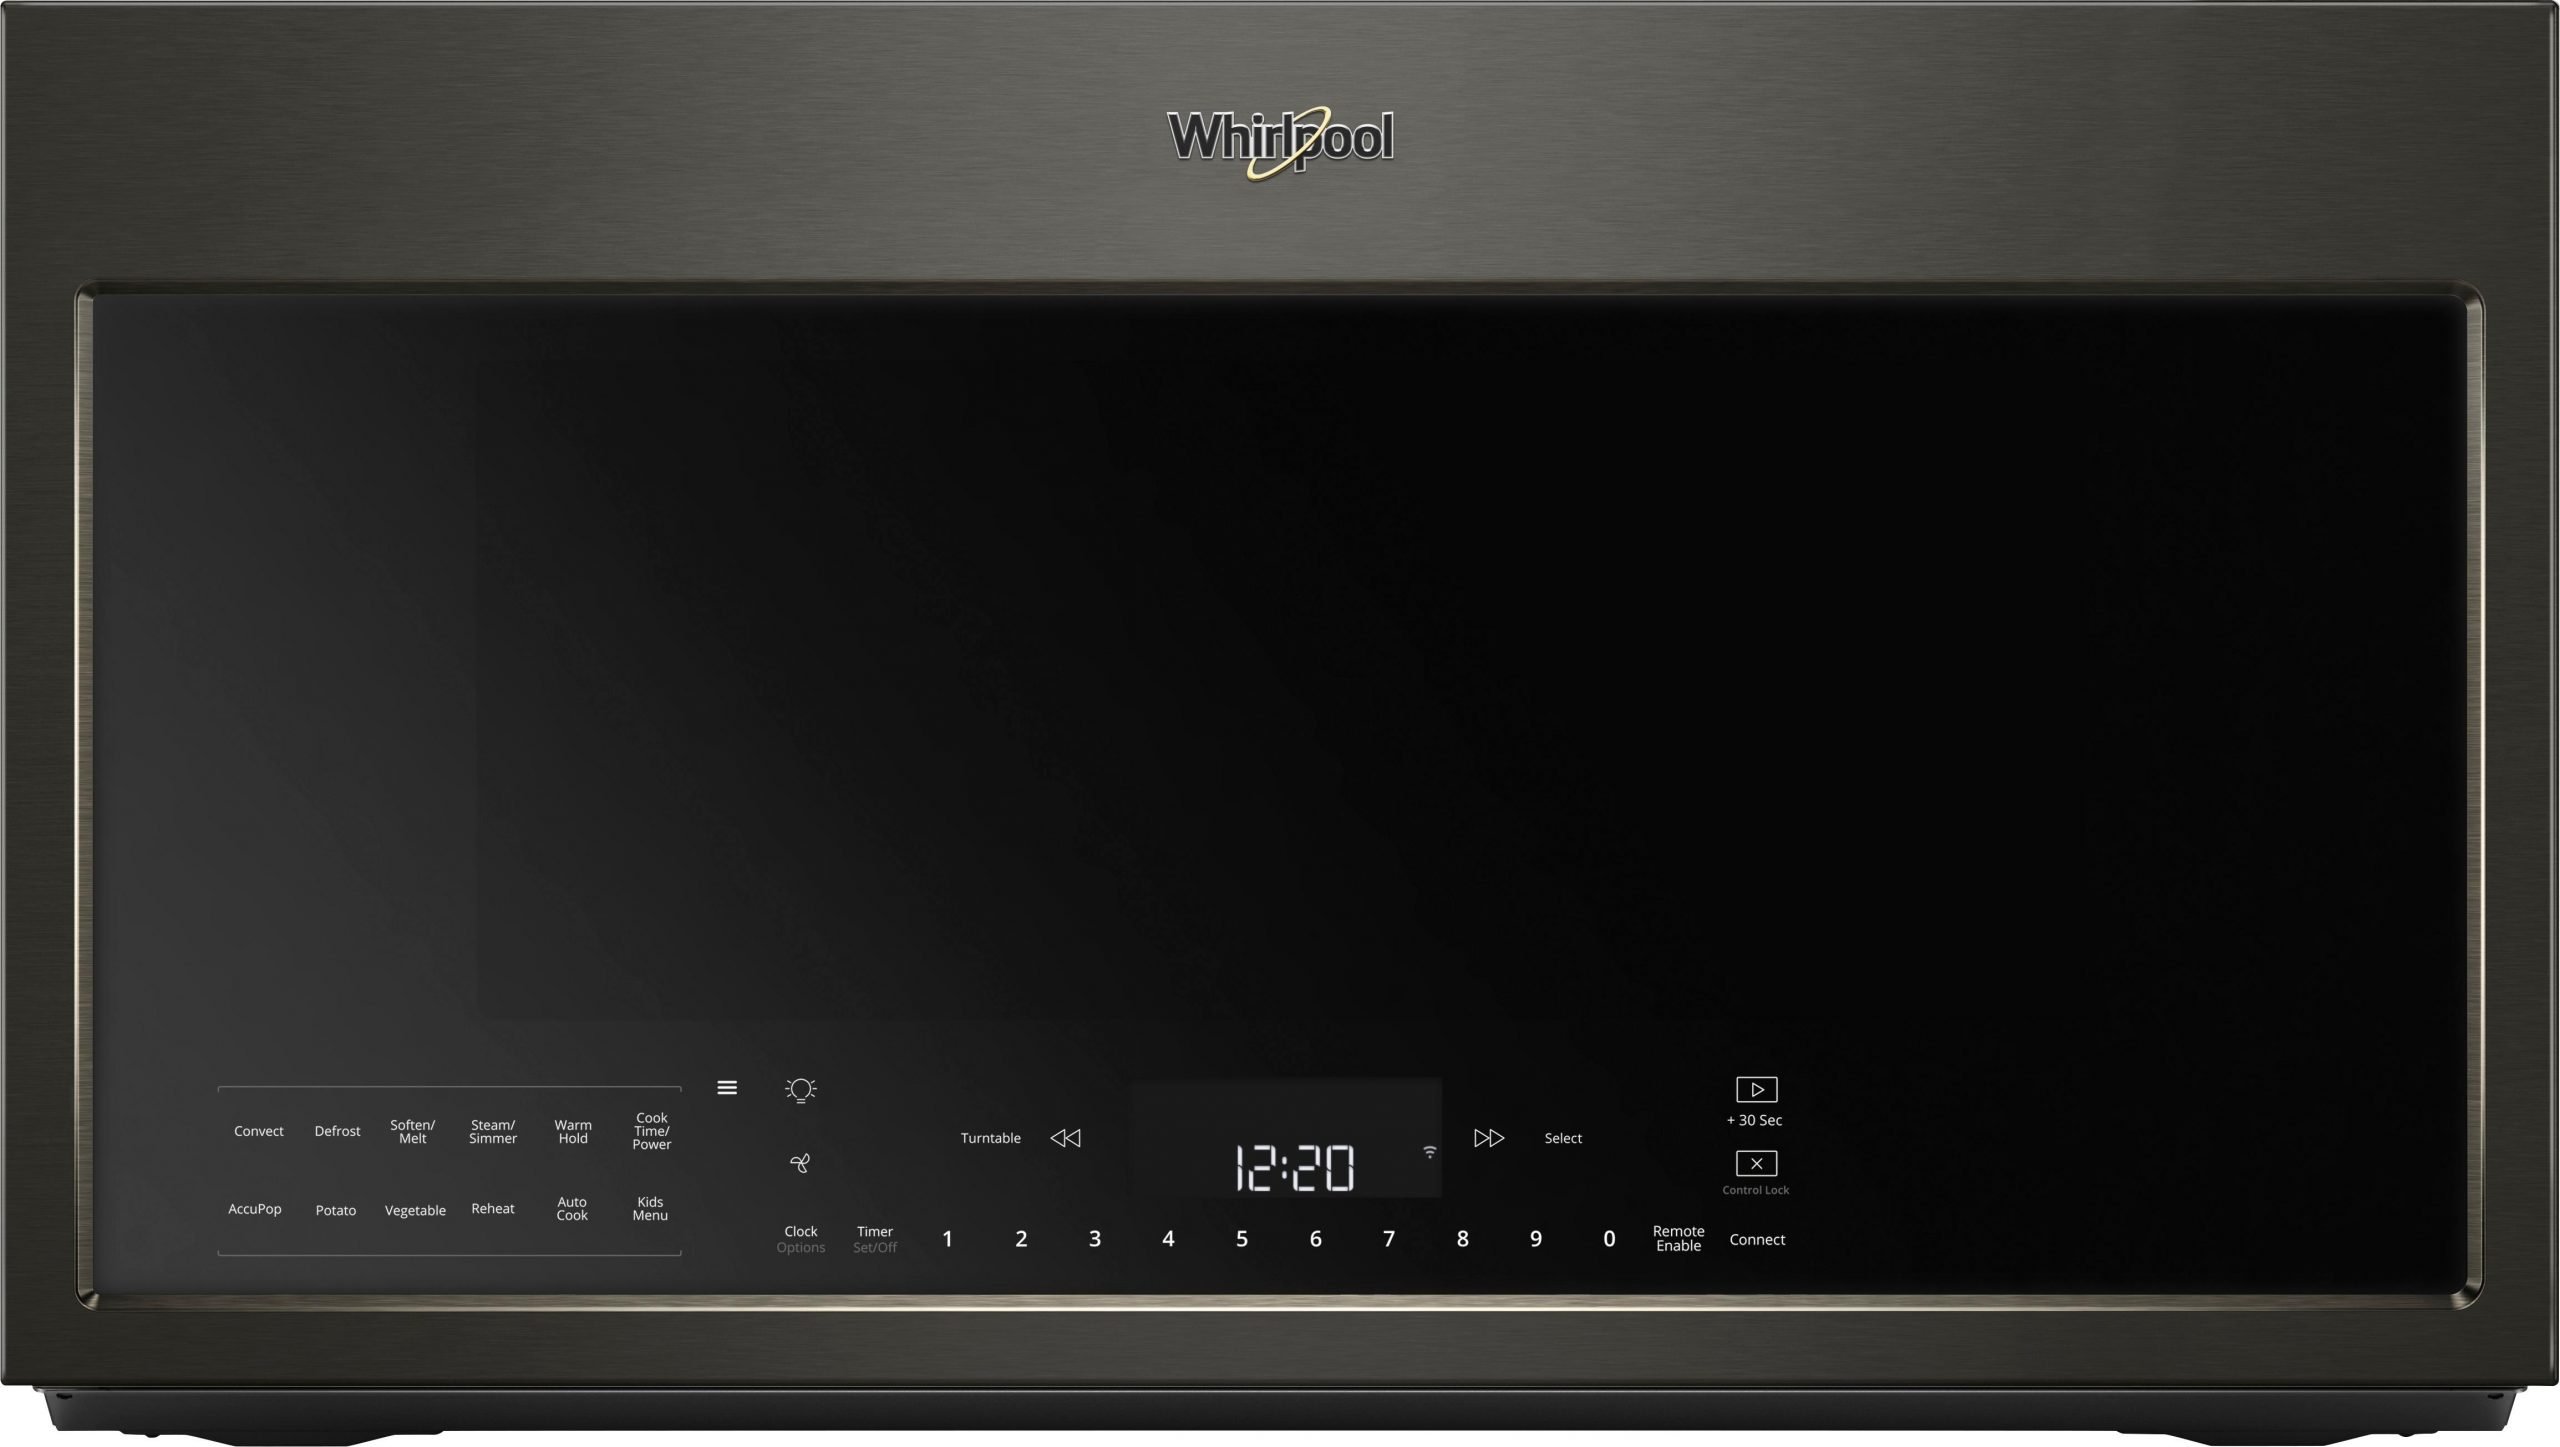 Whirlpool - 1.9 Cu. Ft. Convection Over-the-Range Microwave with Sensor Cooking - Black stainless steel